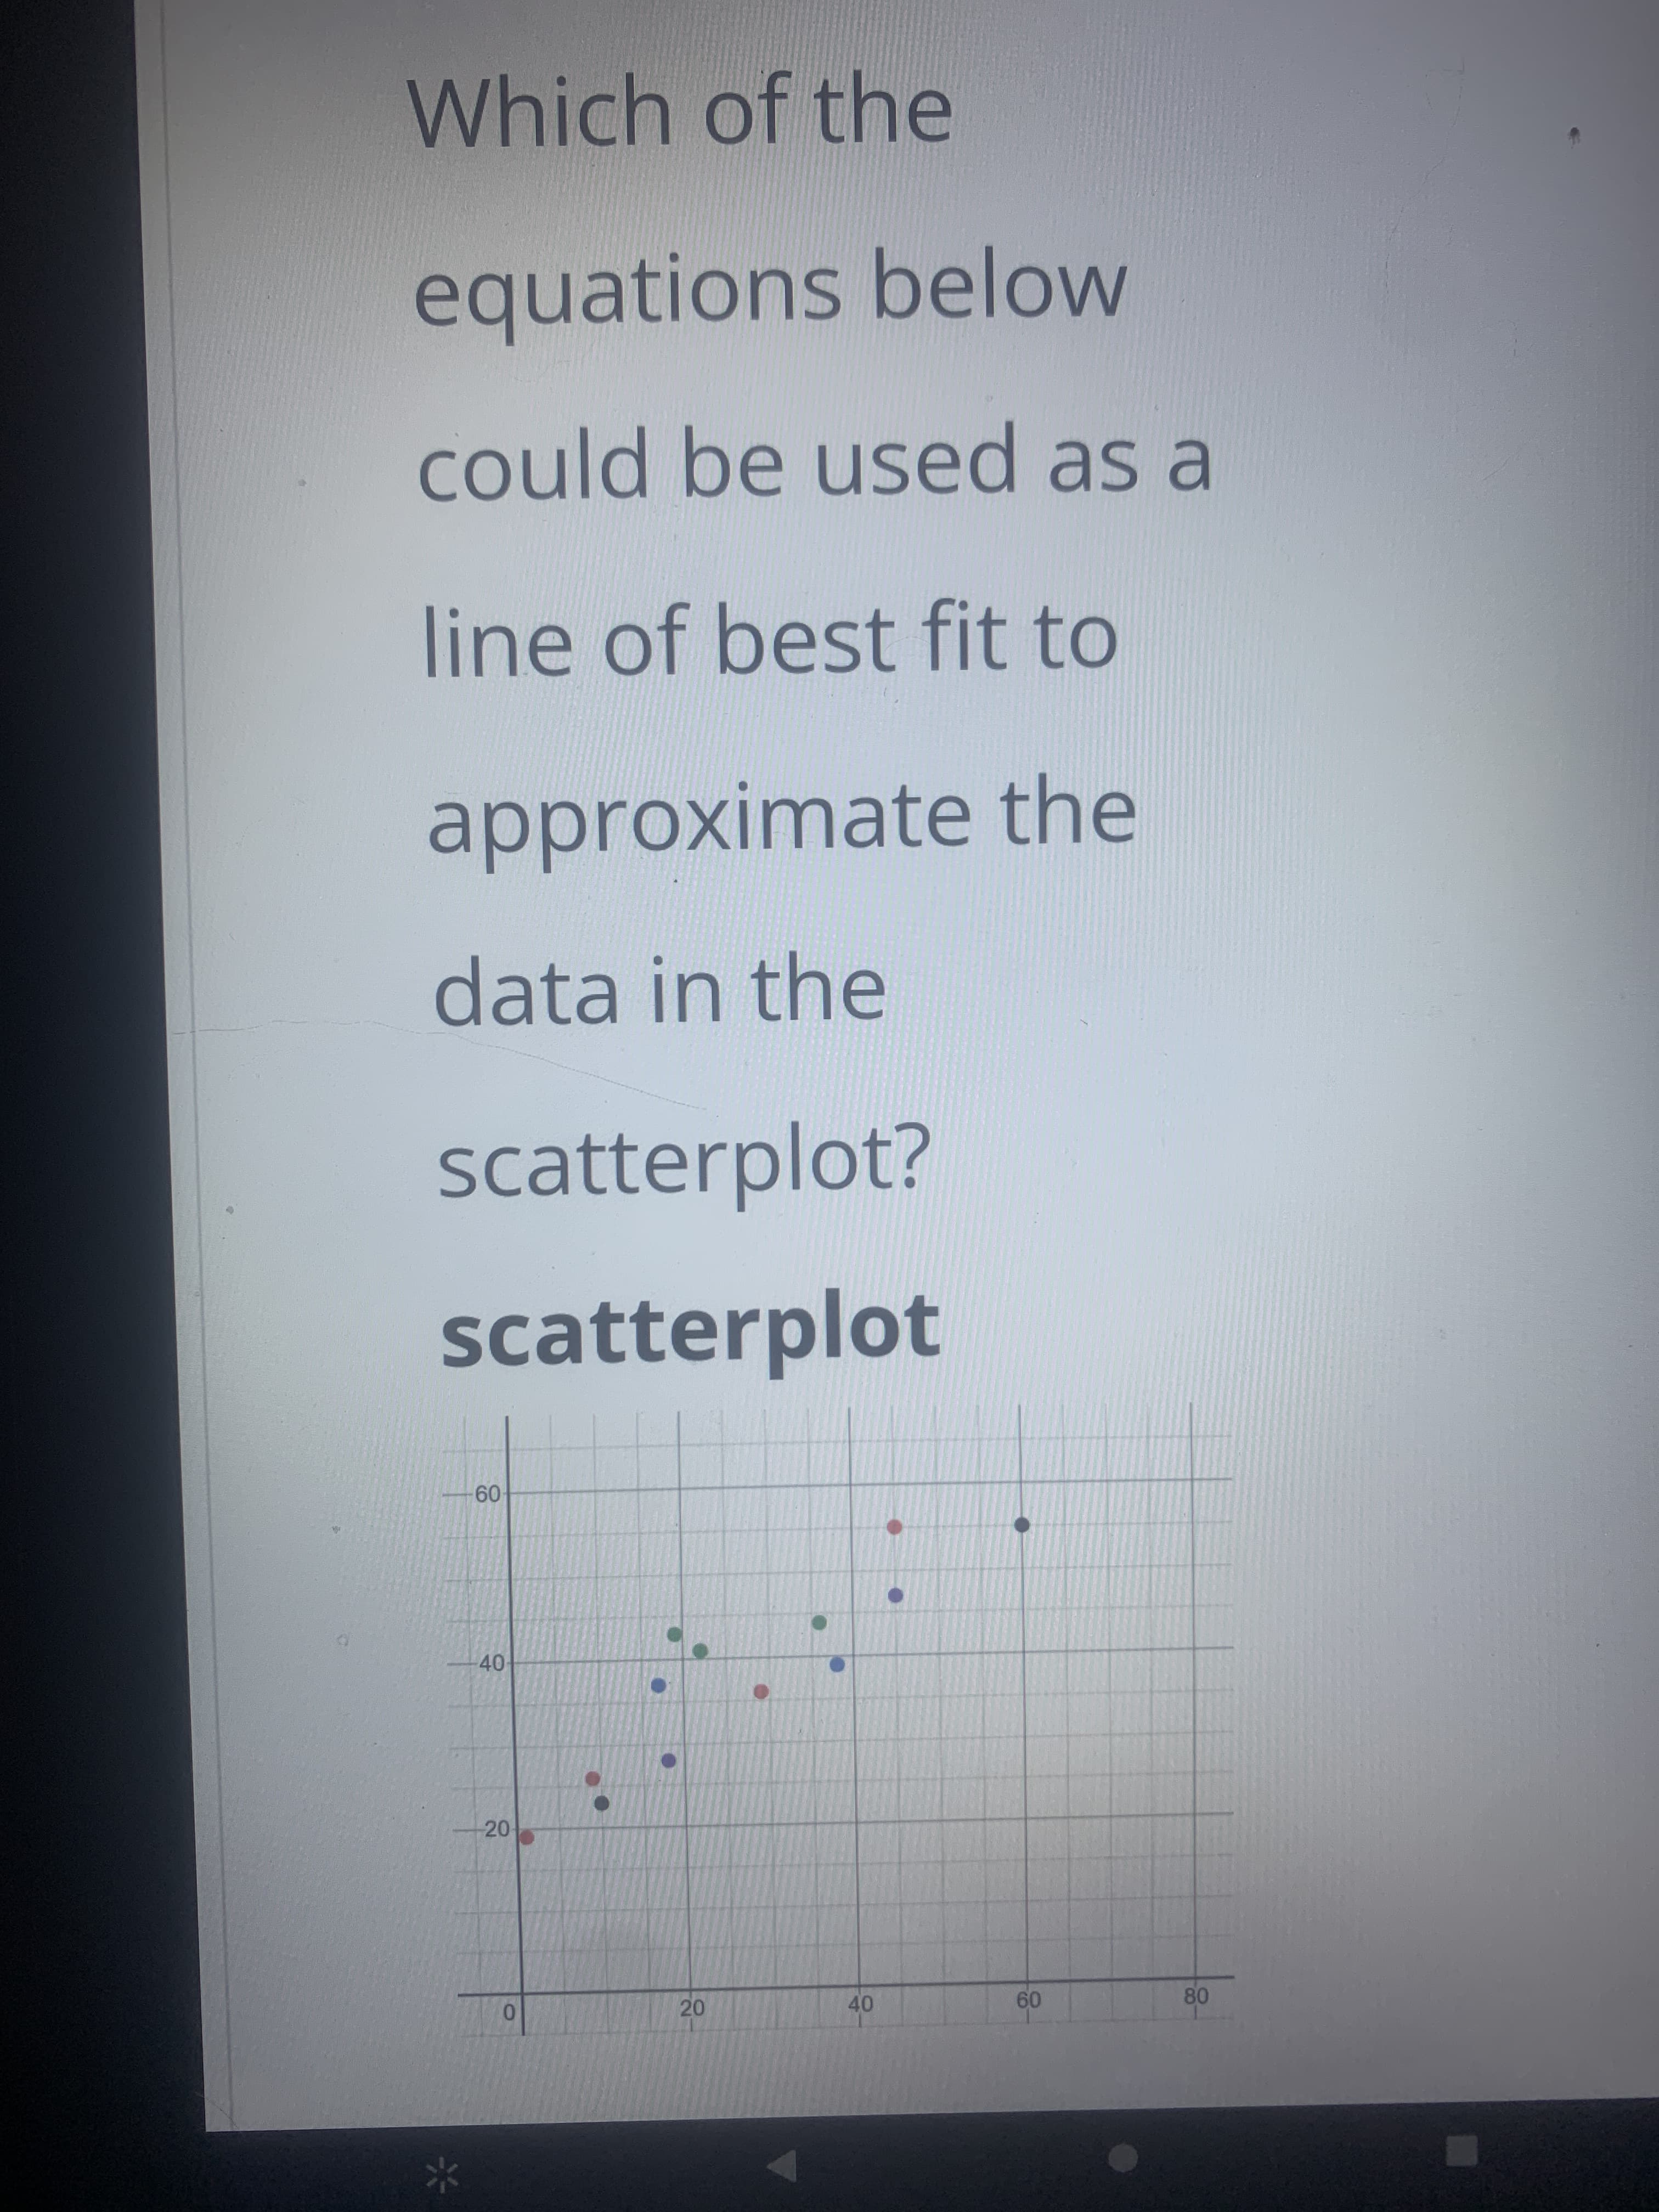 Which of the
equations below
could be used as a
line of best fit to
approximate the
data in the
scatterplot?
scatterplot
09-
-40
-20
20.
09
40
